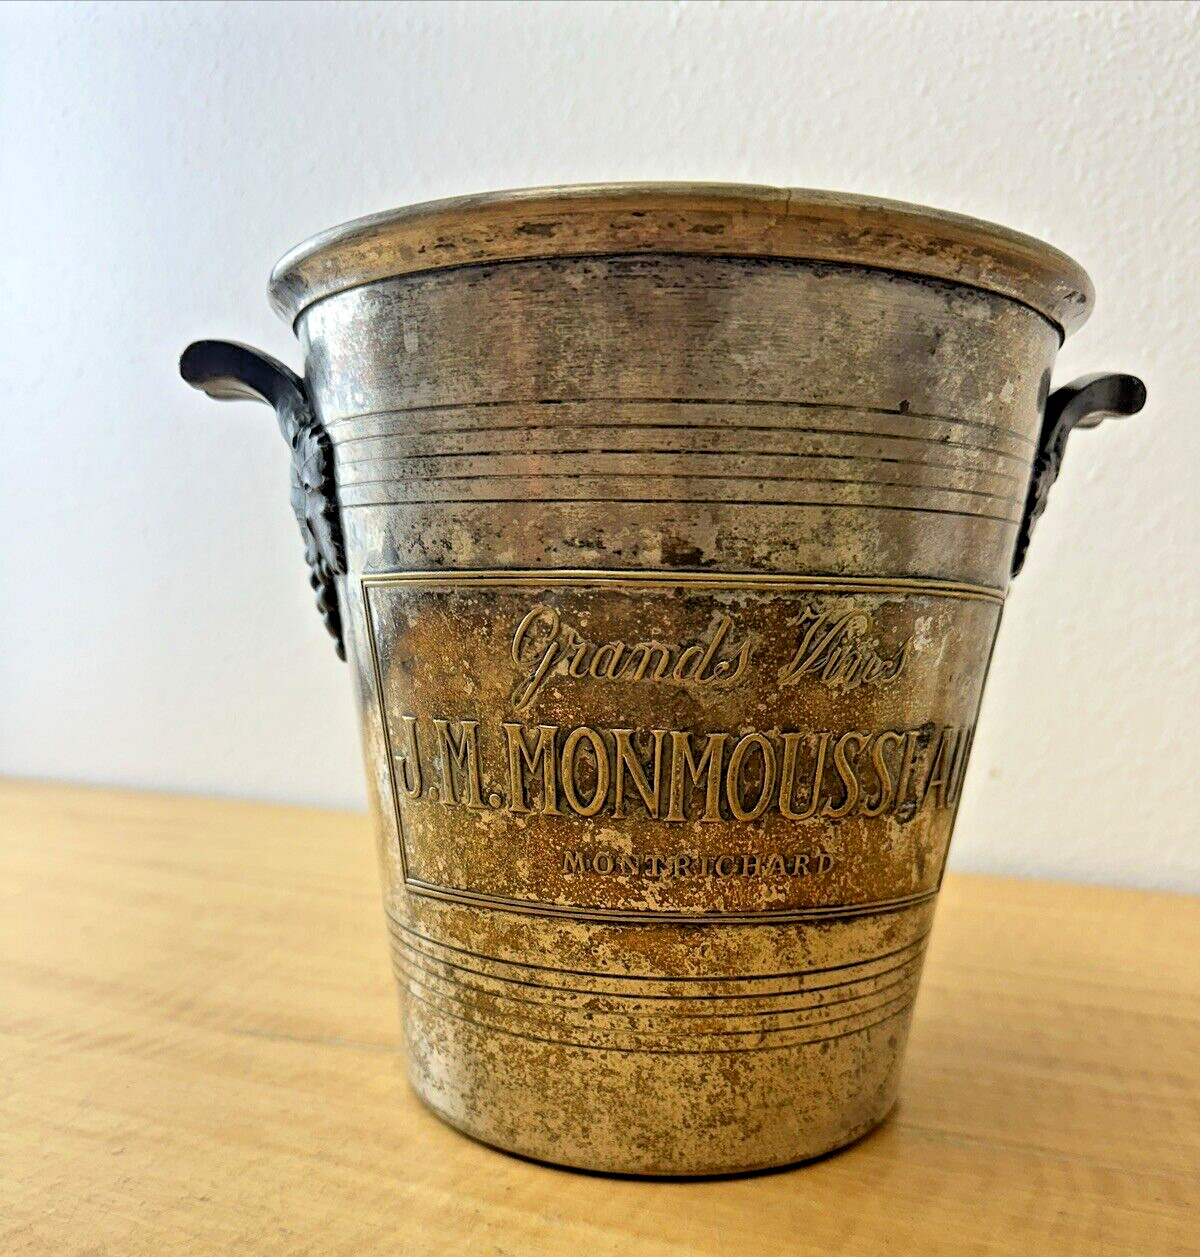 Very Old Grands Vins J.M Monmousseau Champagne Cooler Ice Bucket